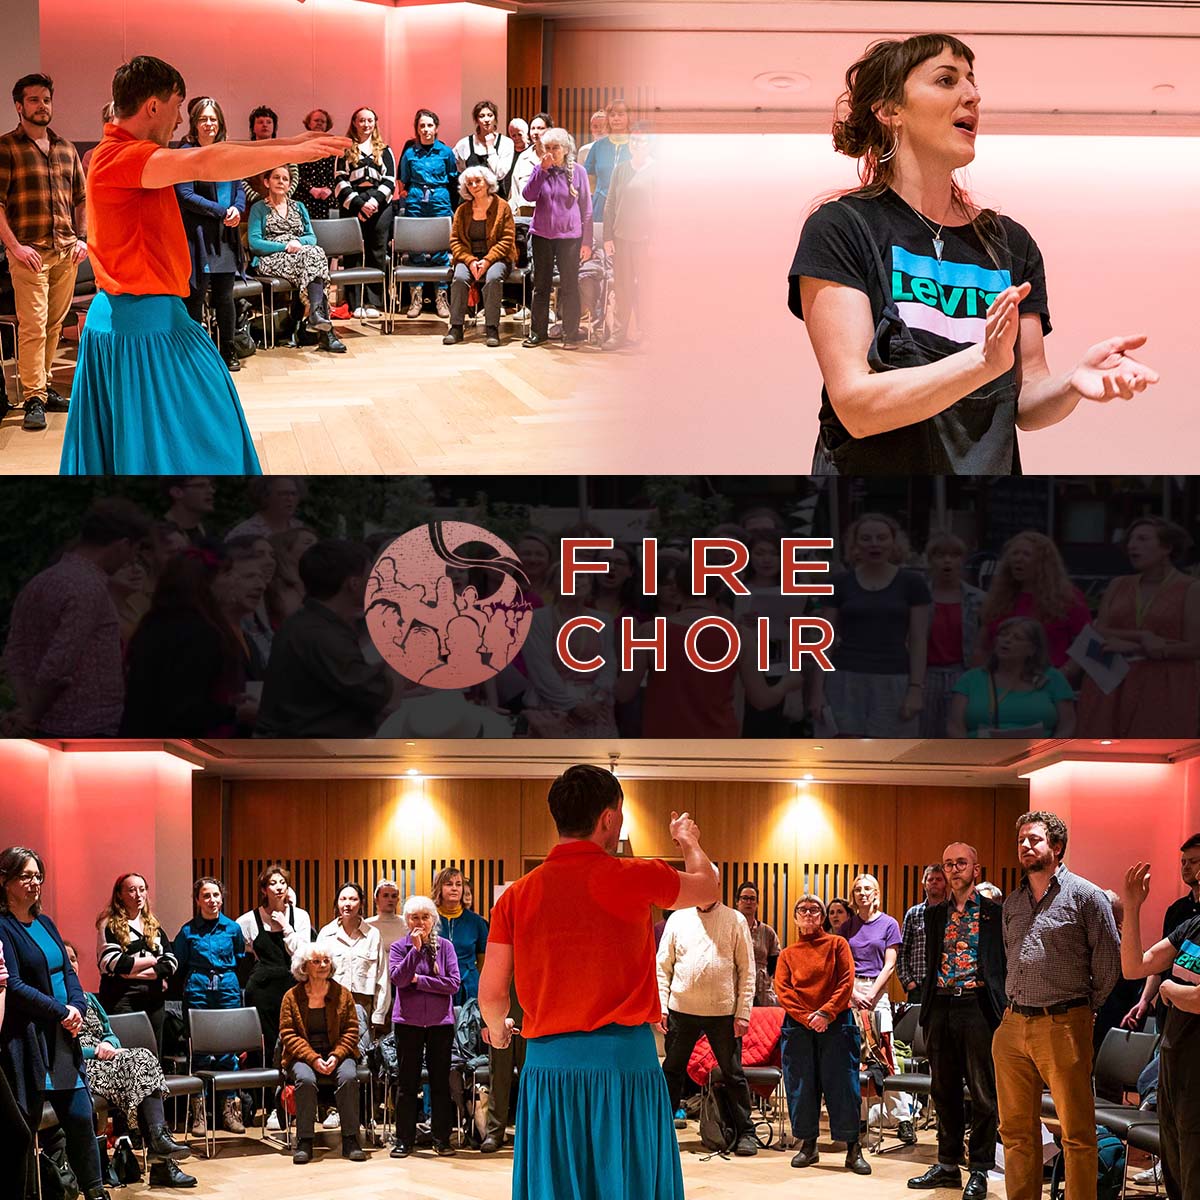 Fire Choir returns for the summer term next week! Come and join us at @KingsPlace for joyful communal singing on Monday evenings. If you're new to the choir sign up for a free trial now. No experience necessary!